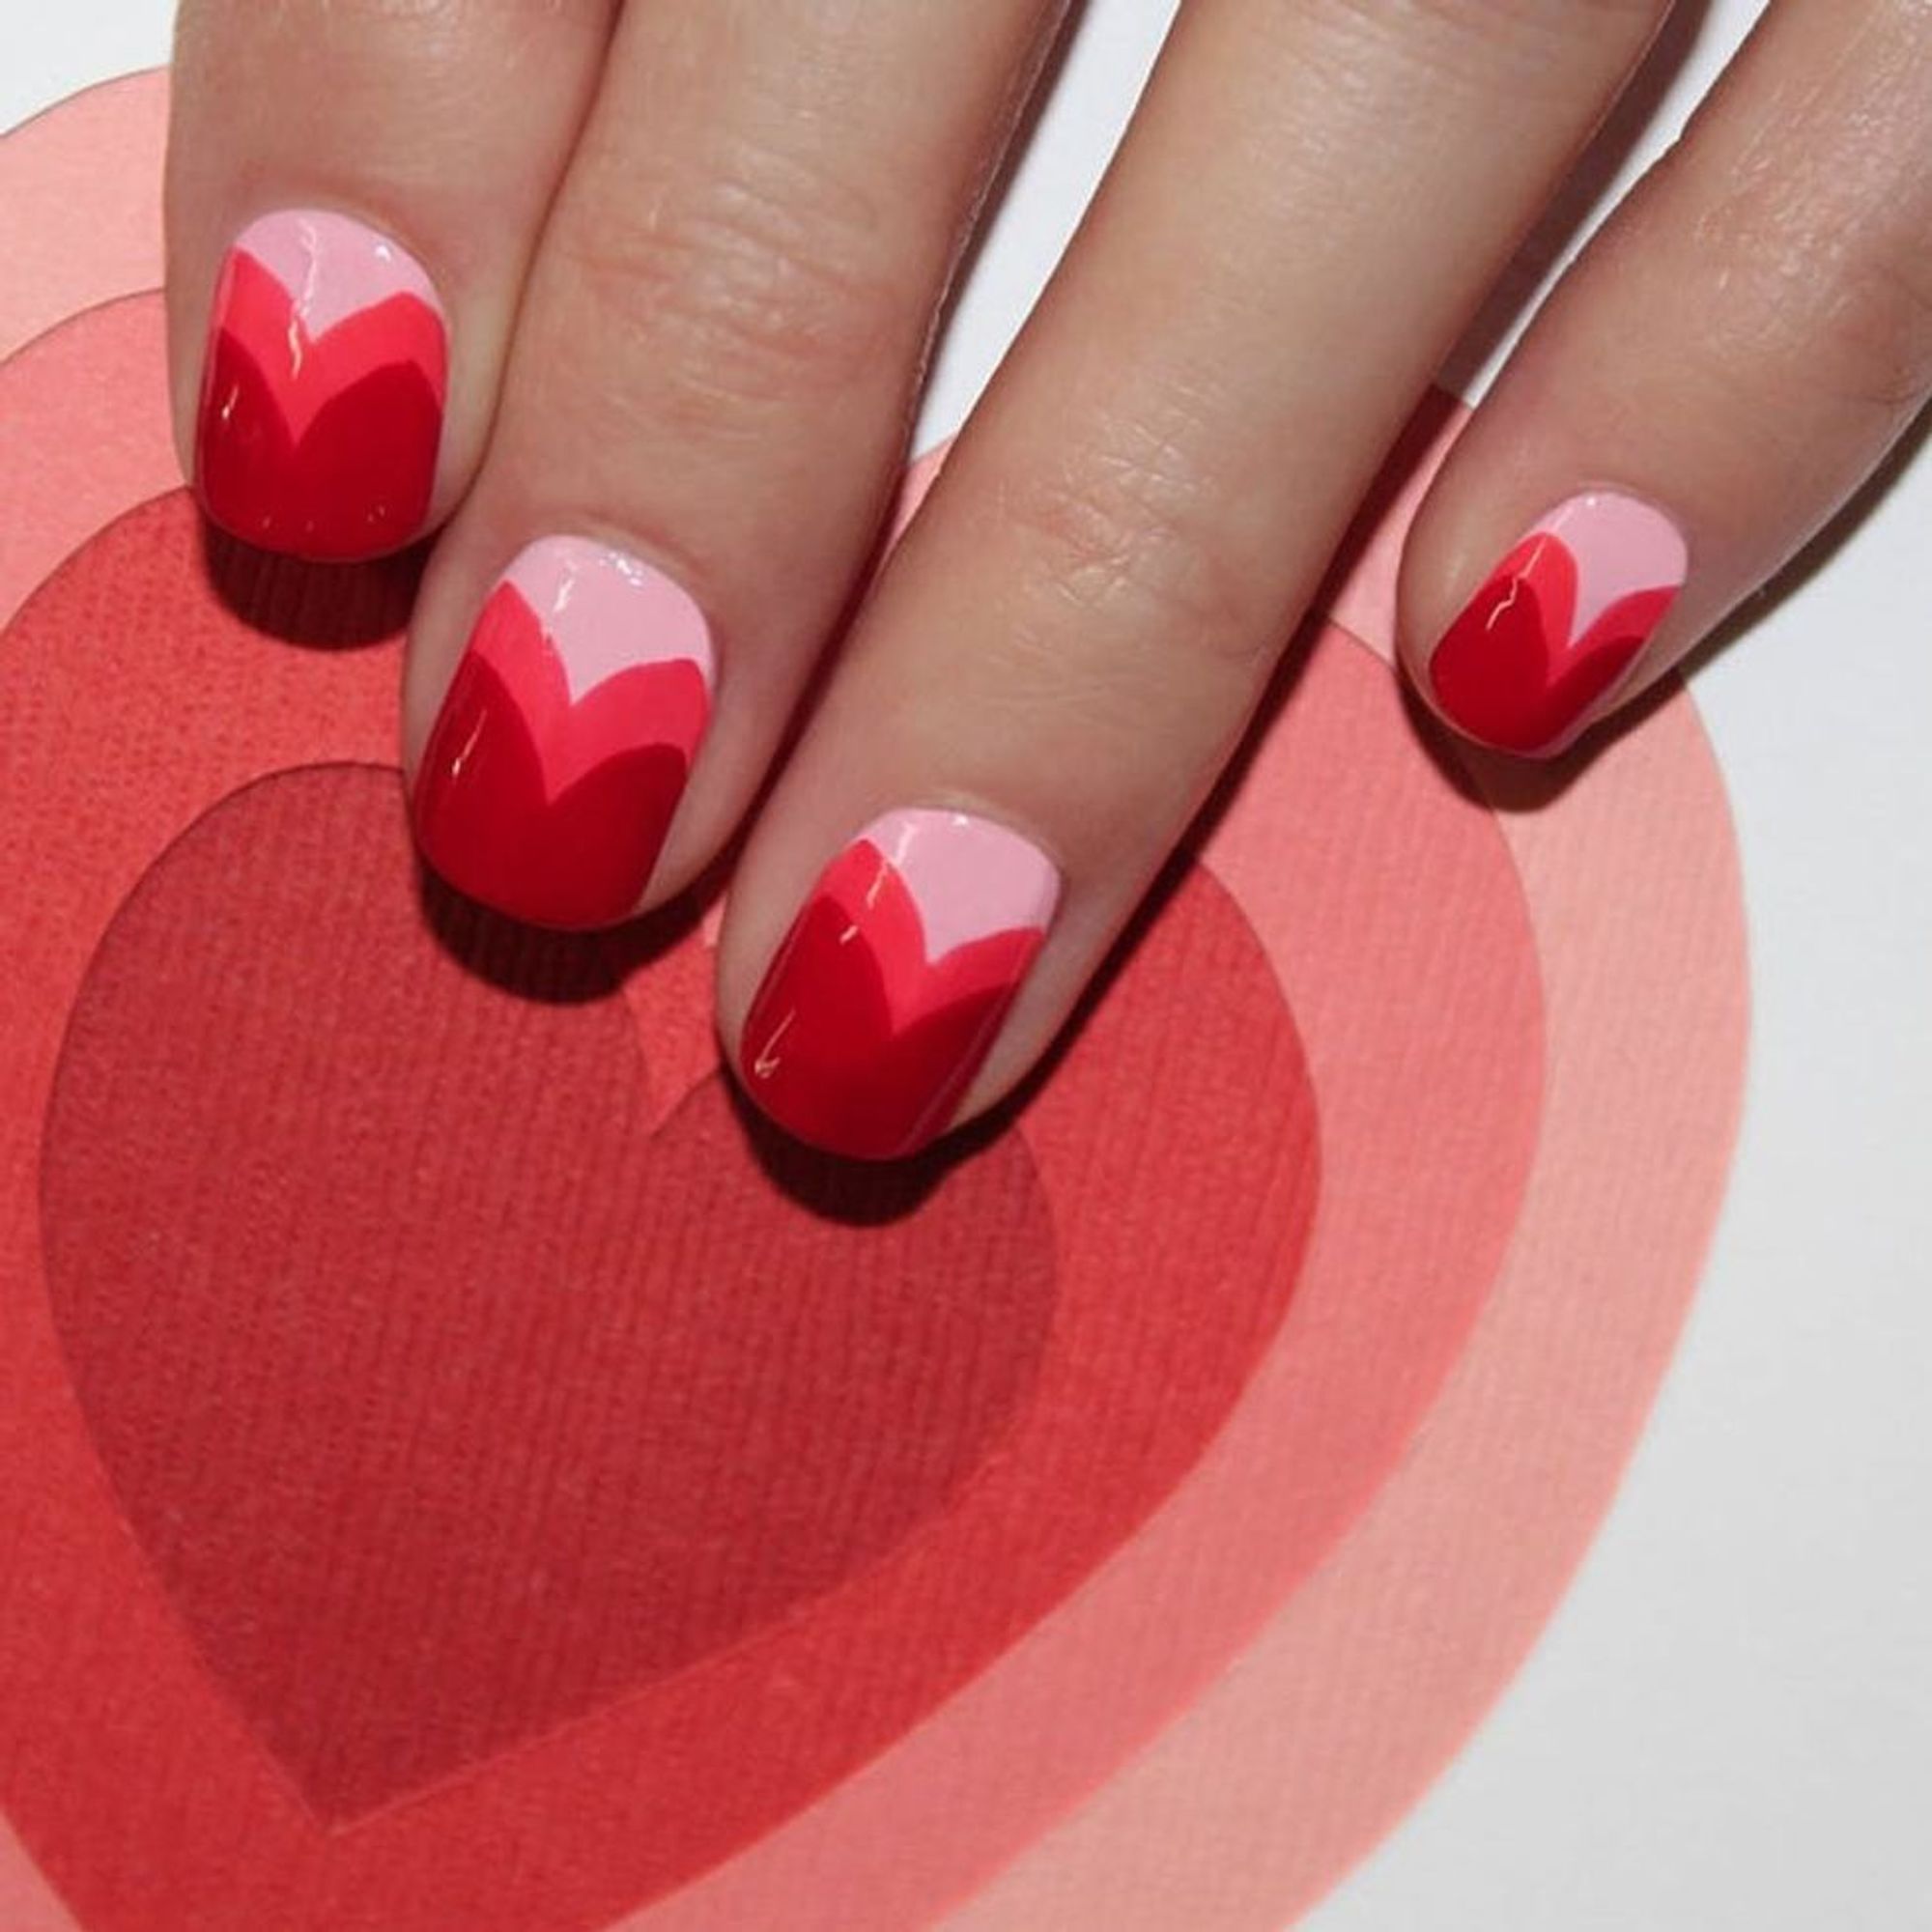 16 Valentine’s Day Nail Art Designs You’ll Heart - Brit + Co